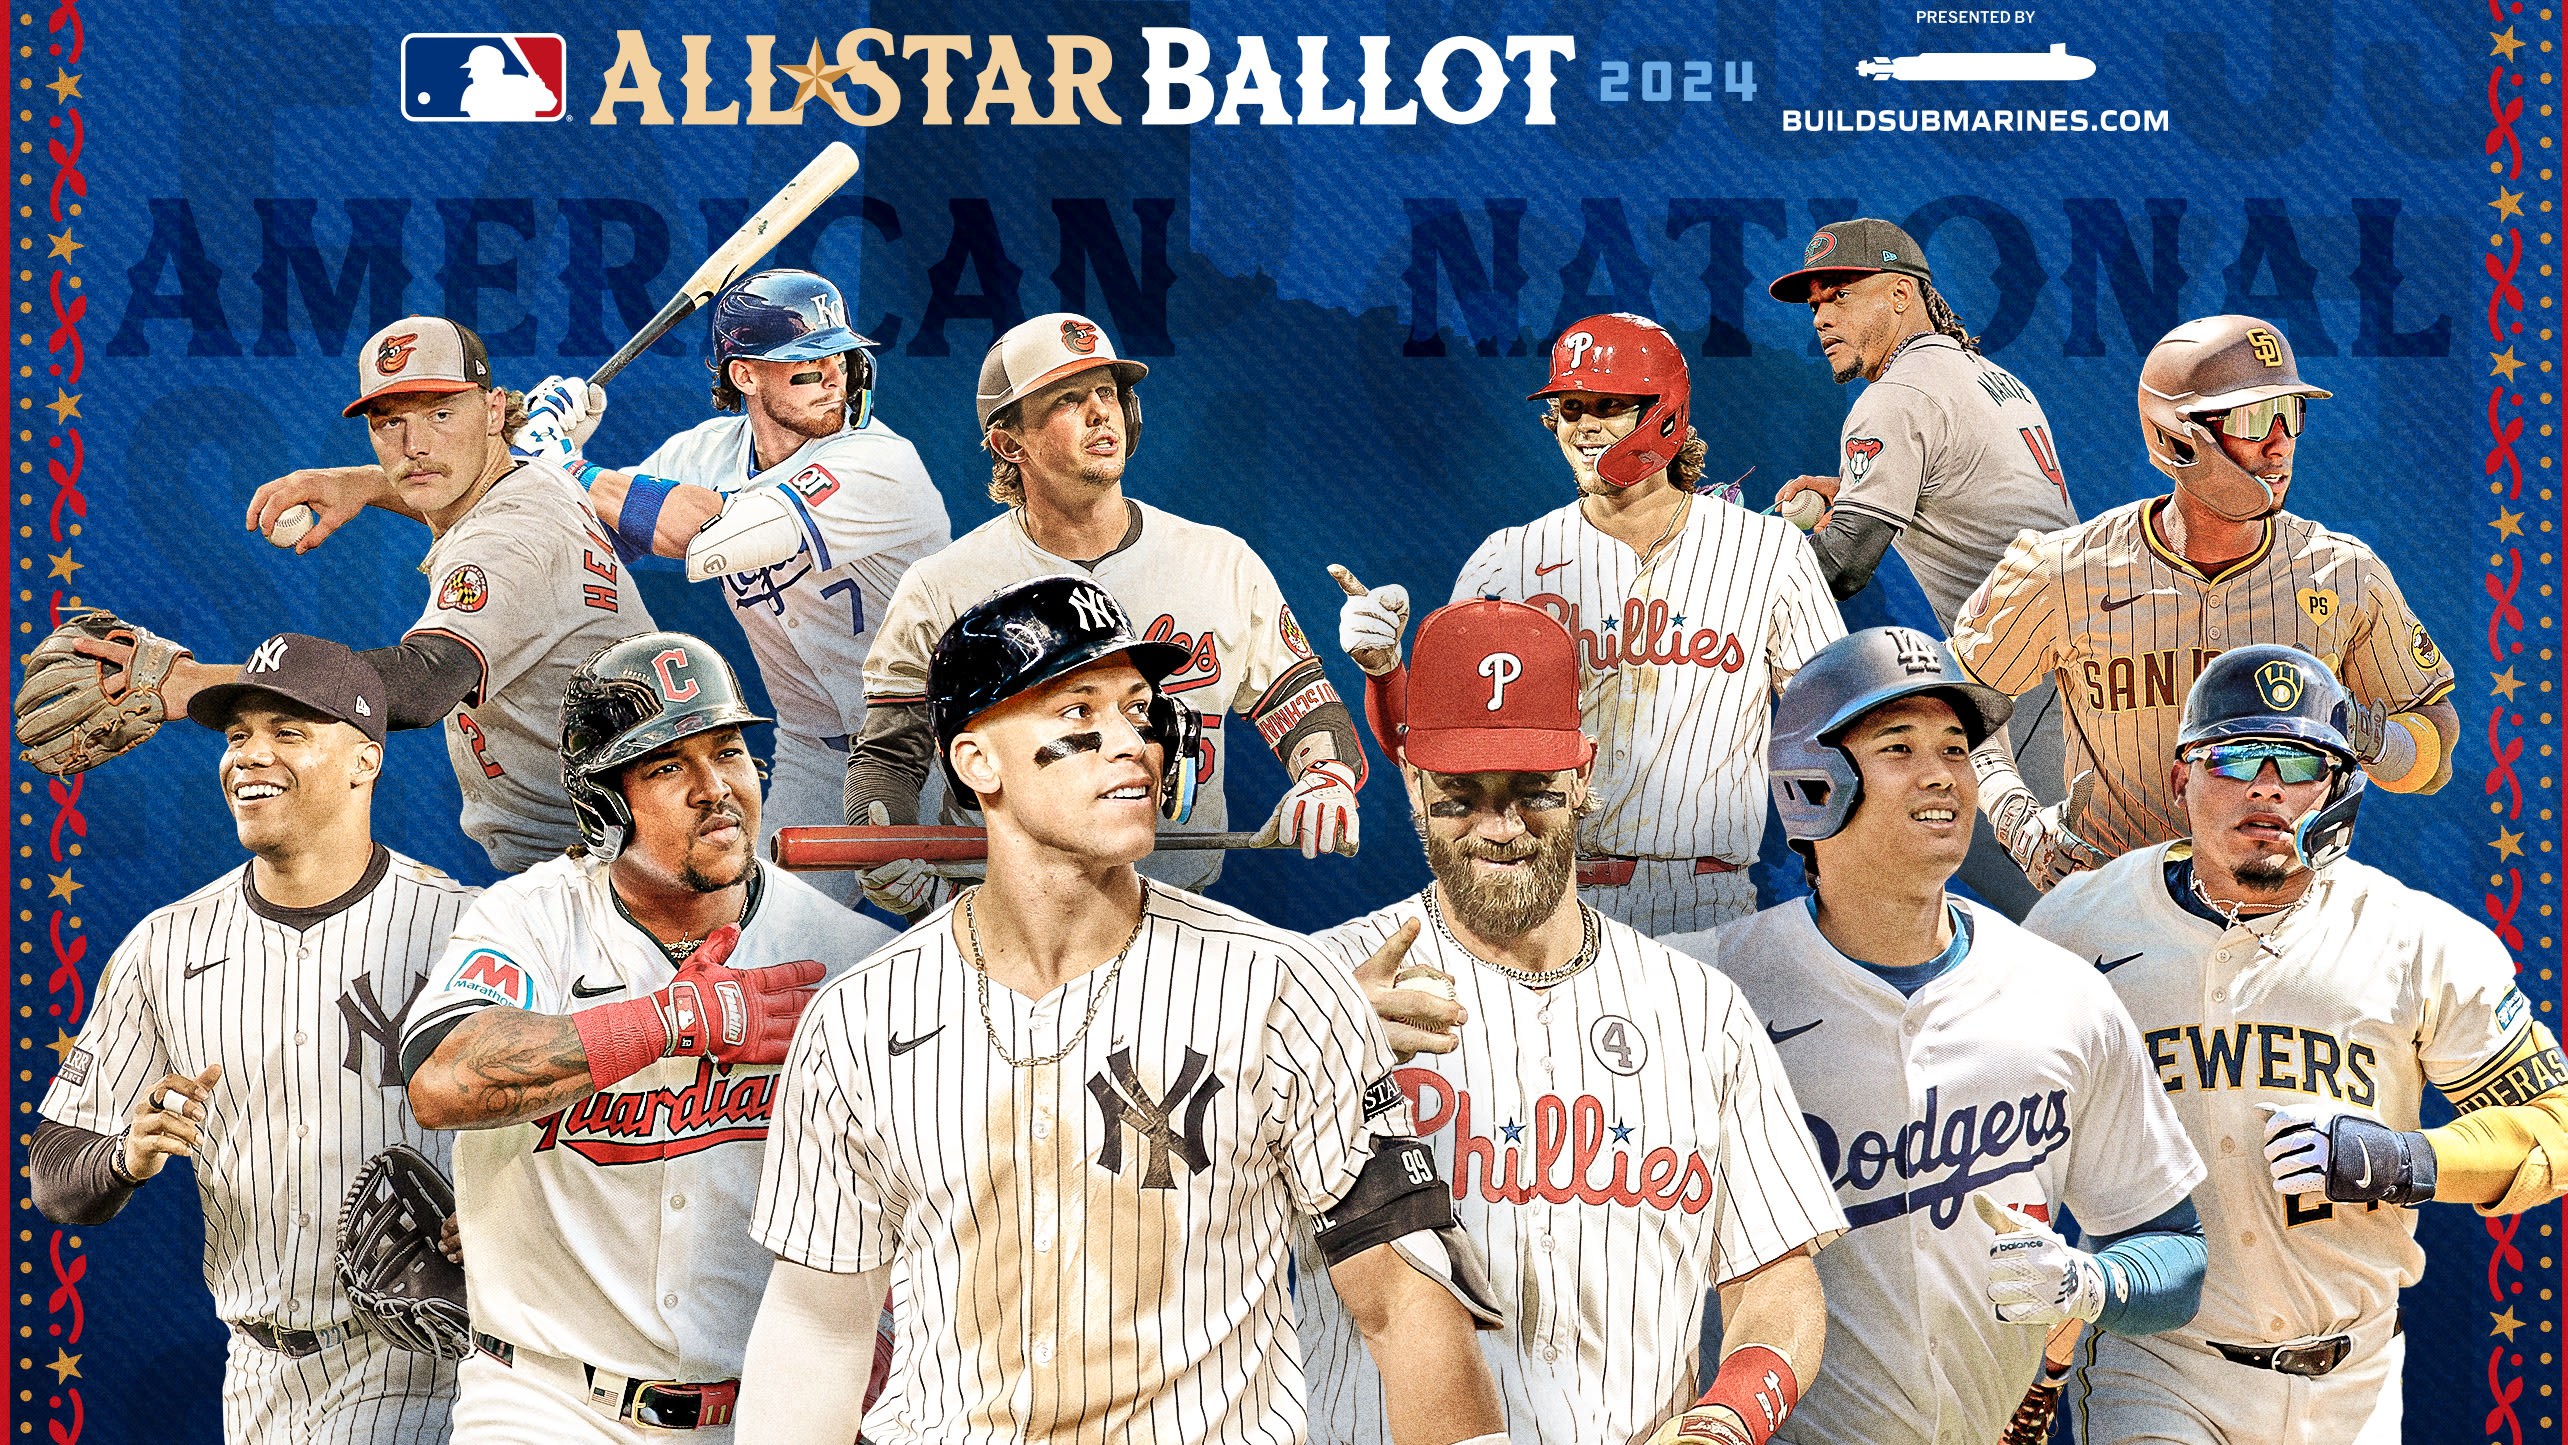 A collage of All-Star Ballot finalists